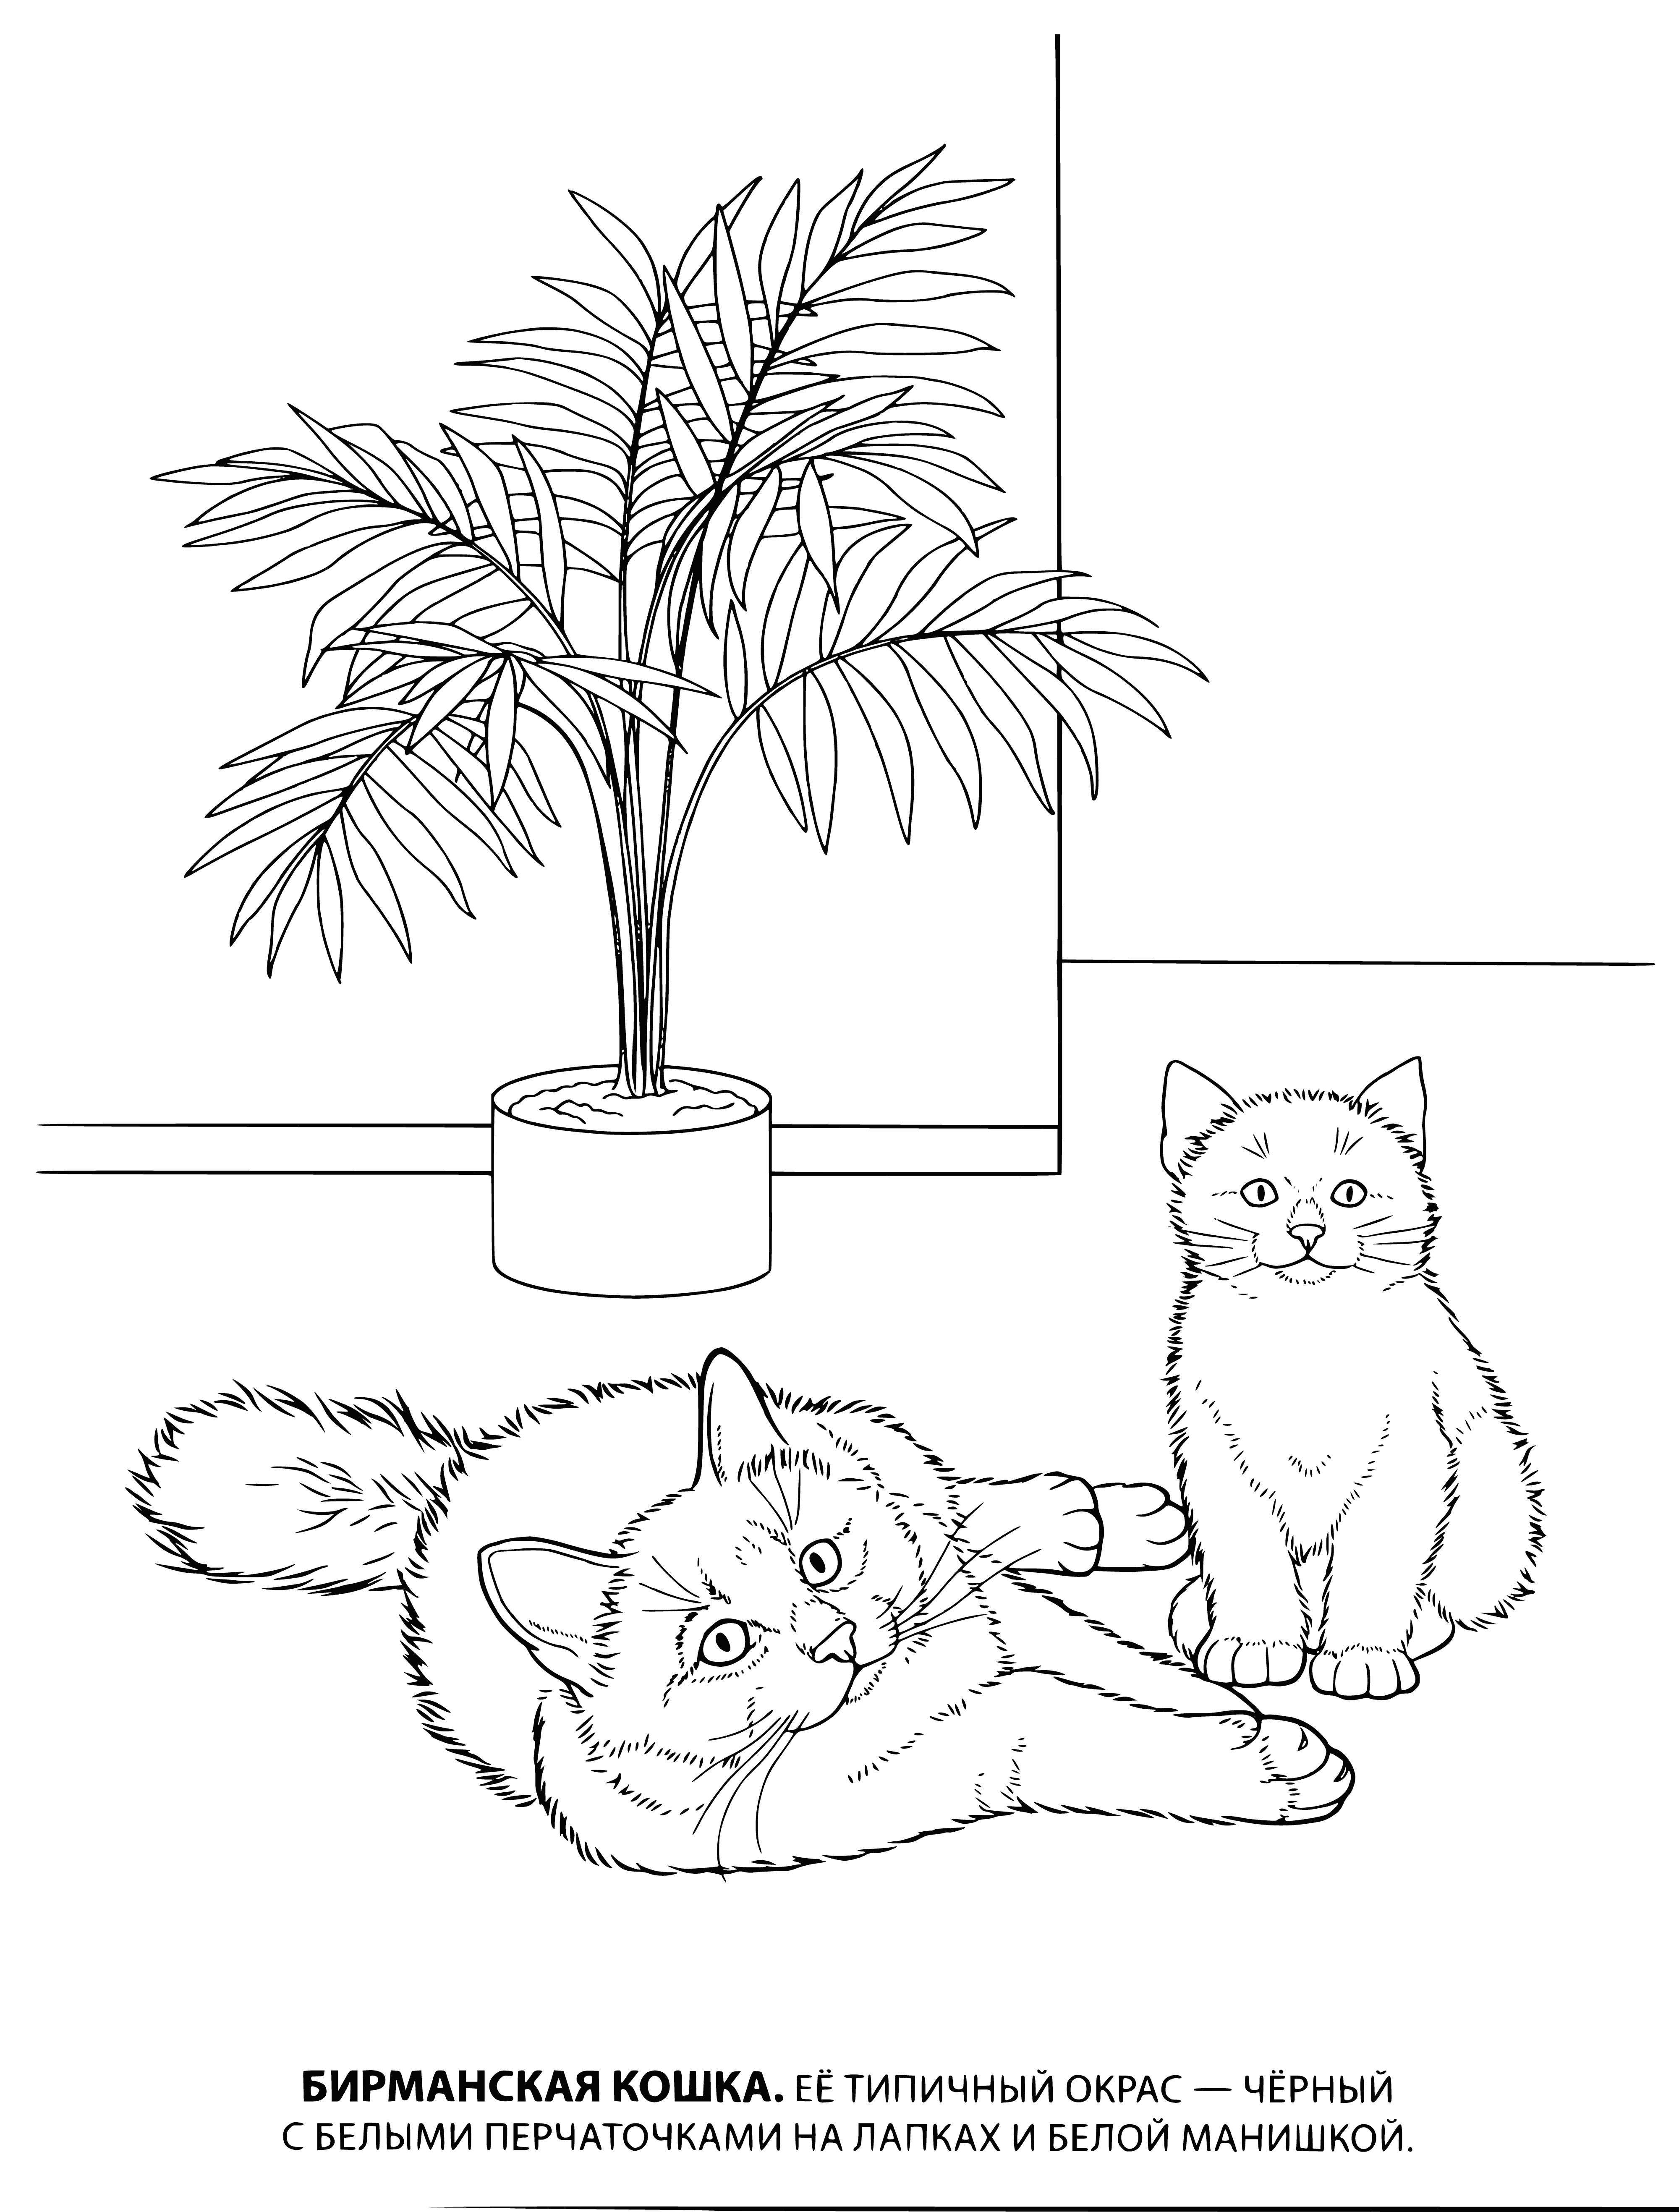 coloring page: Burmese cats are medium-large, muscular cats with round heads, small ears, and a variety of fur colors. They have smooth, silky coats, large eyes set far apart, and short legs.